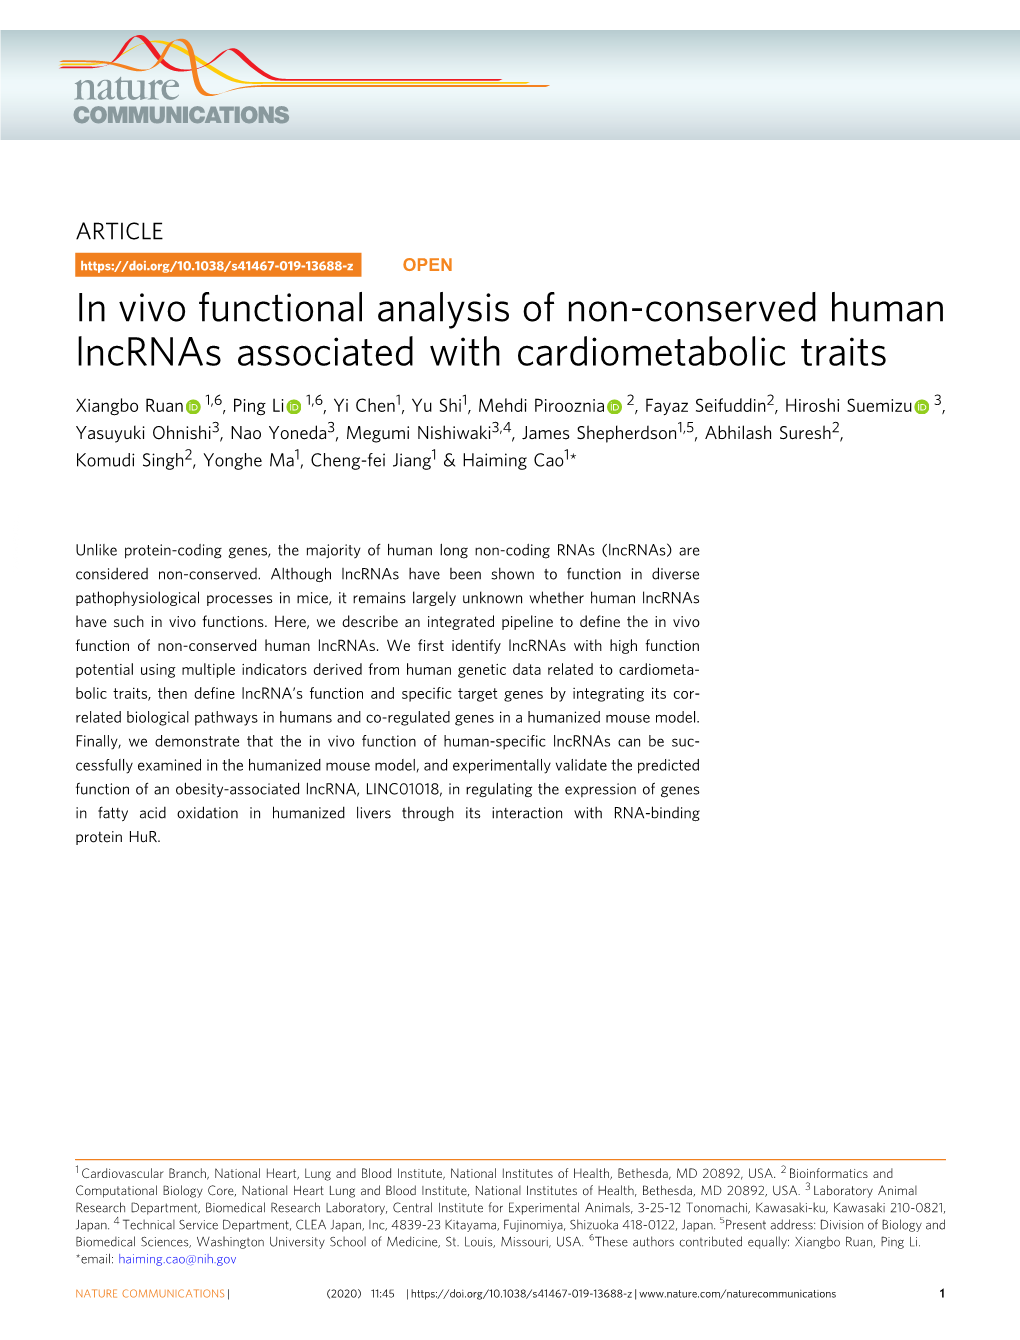 In Vivo Functional Analysis of Non-Conserved Human Lncrnas Associated with Cardiometabolic Traits